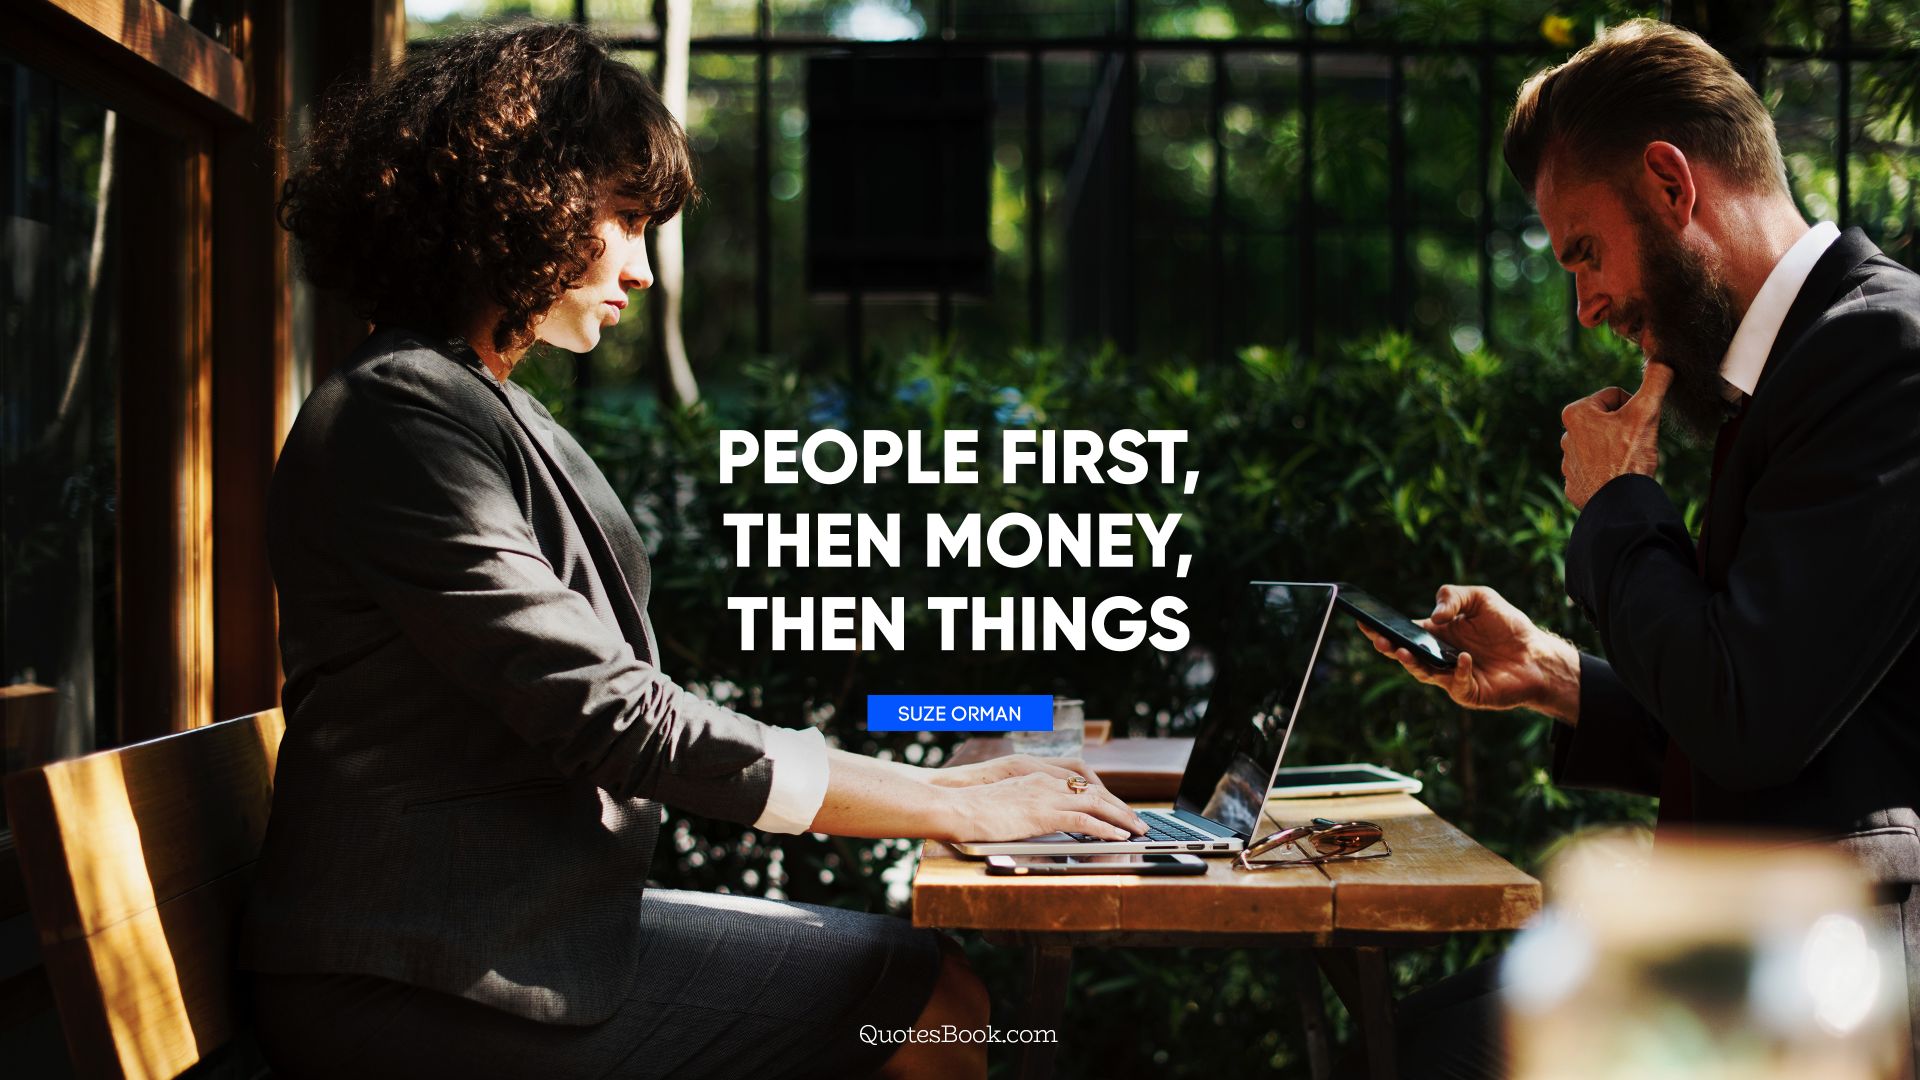 People first, then money, then things. - Quote by Suze Orman